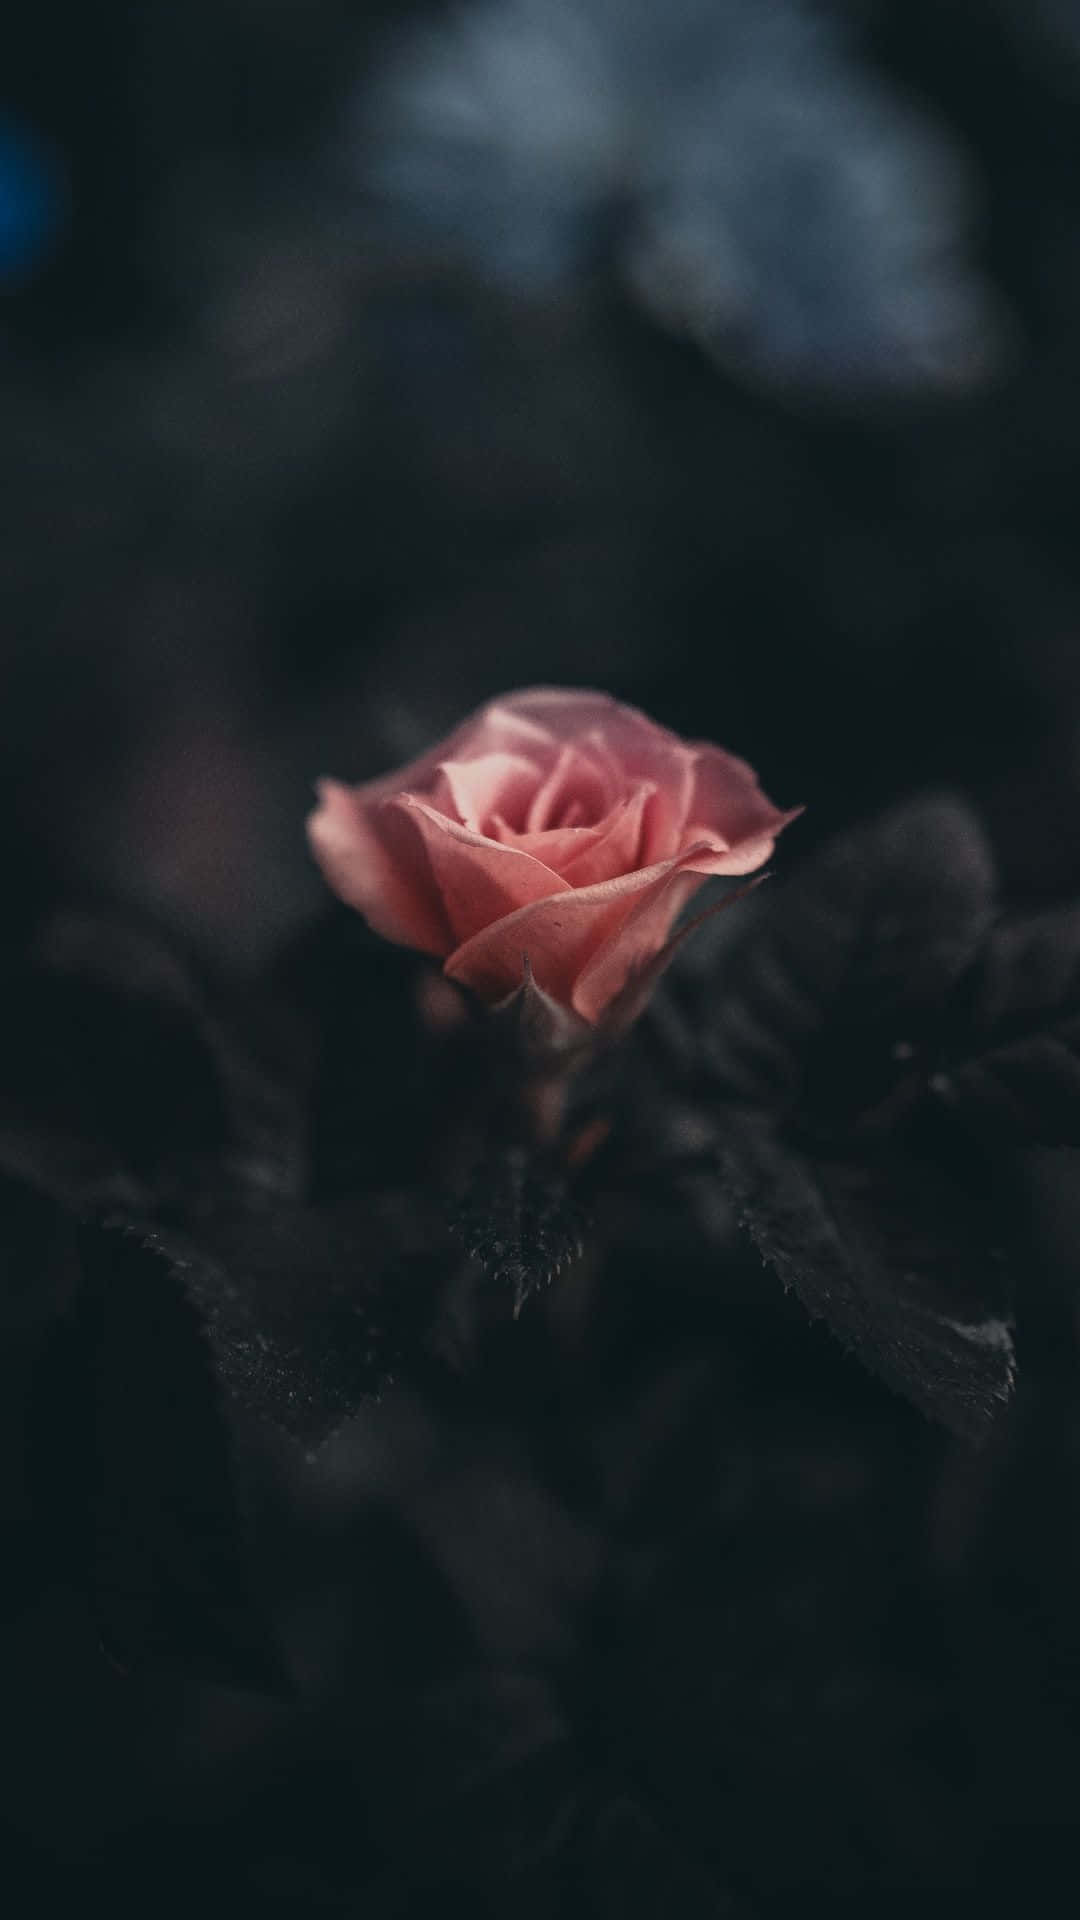 50 Aesthetic Rose iPhone Wallpapers [Free Downloads]